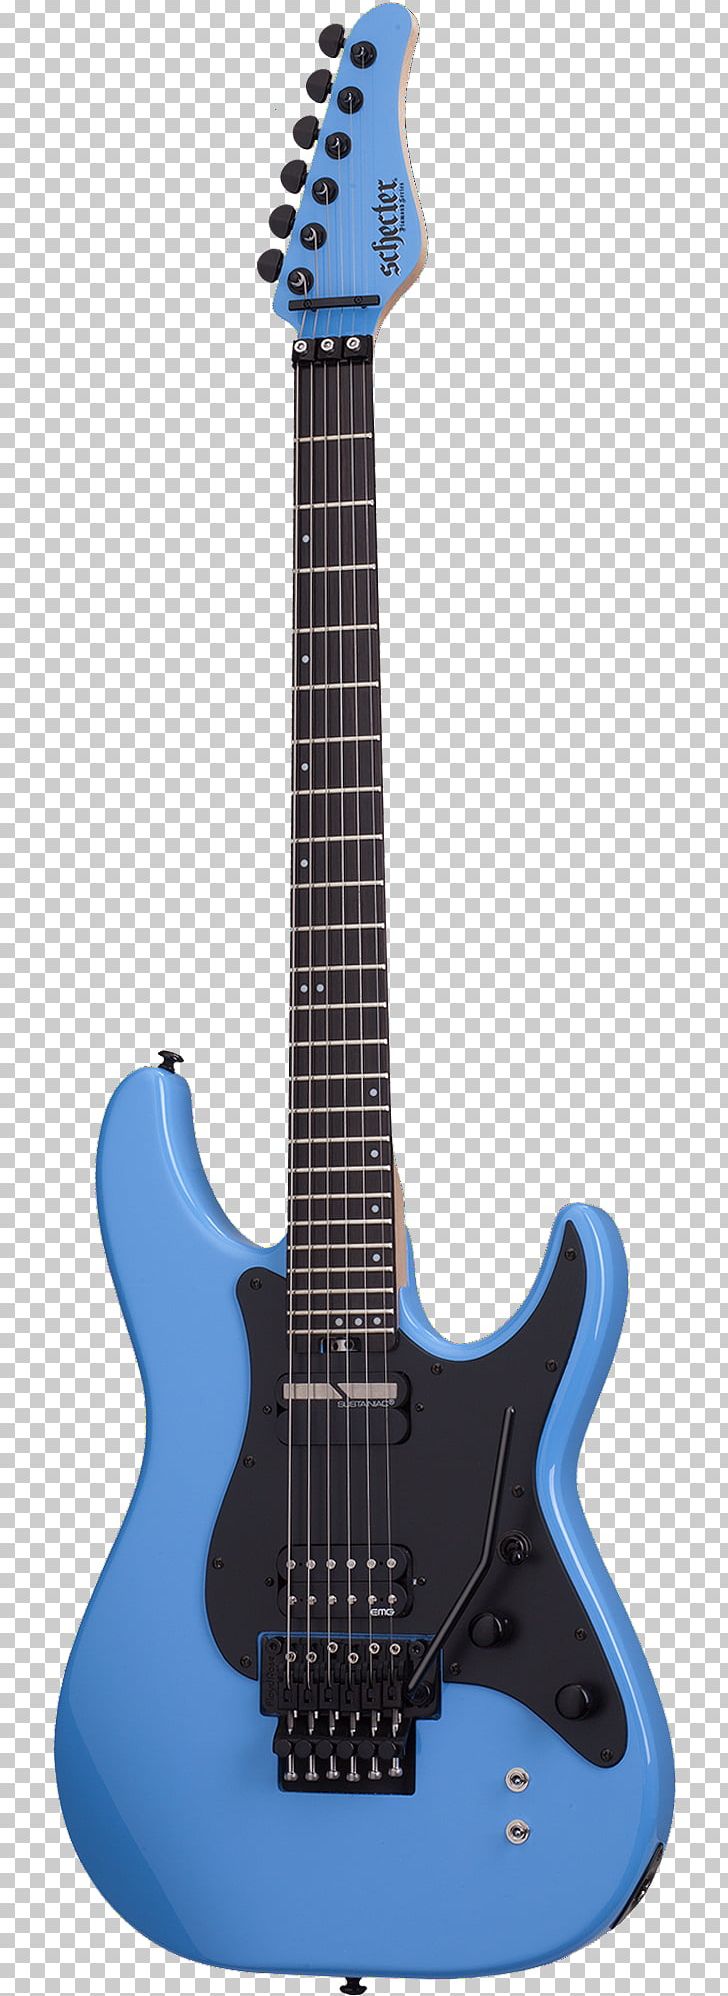 Schecter Guitar Research Electric Guitar Fender Classic 50s Stratocaster Pickup PNG, Clipart, Bass Guitar, Electric Guitar, Fender Classic 50s Stratocaster, Fender Stratocaster, Fingerboard Free PNG Download